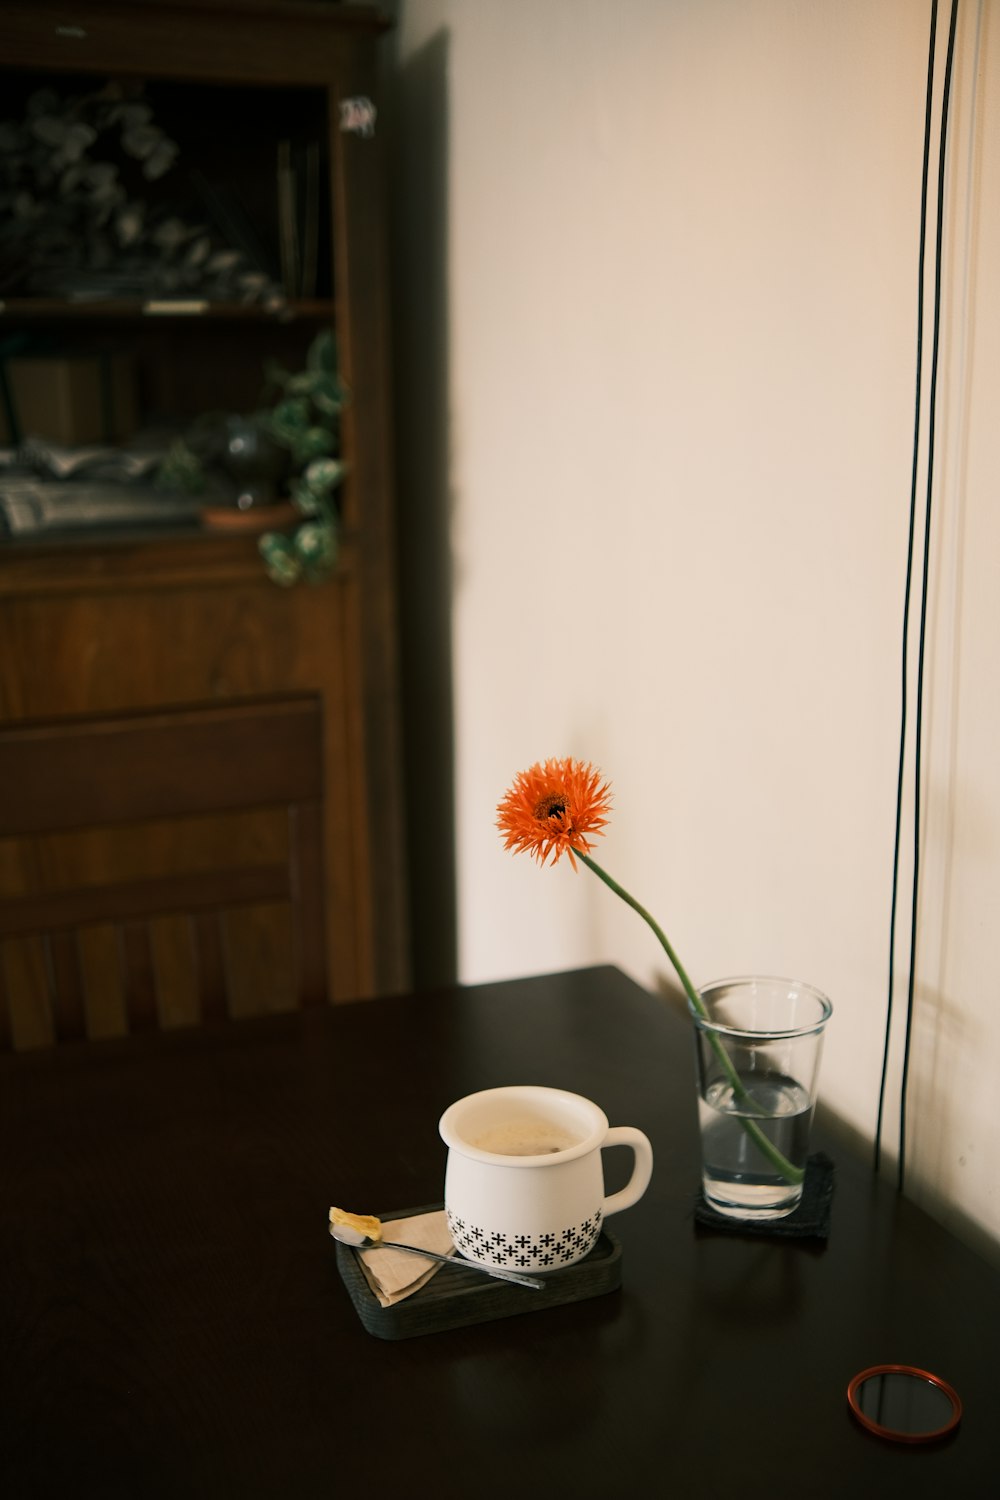 a table with a flower and a cup on it